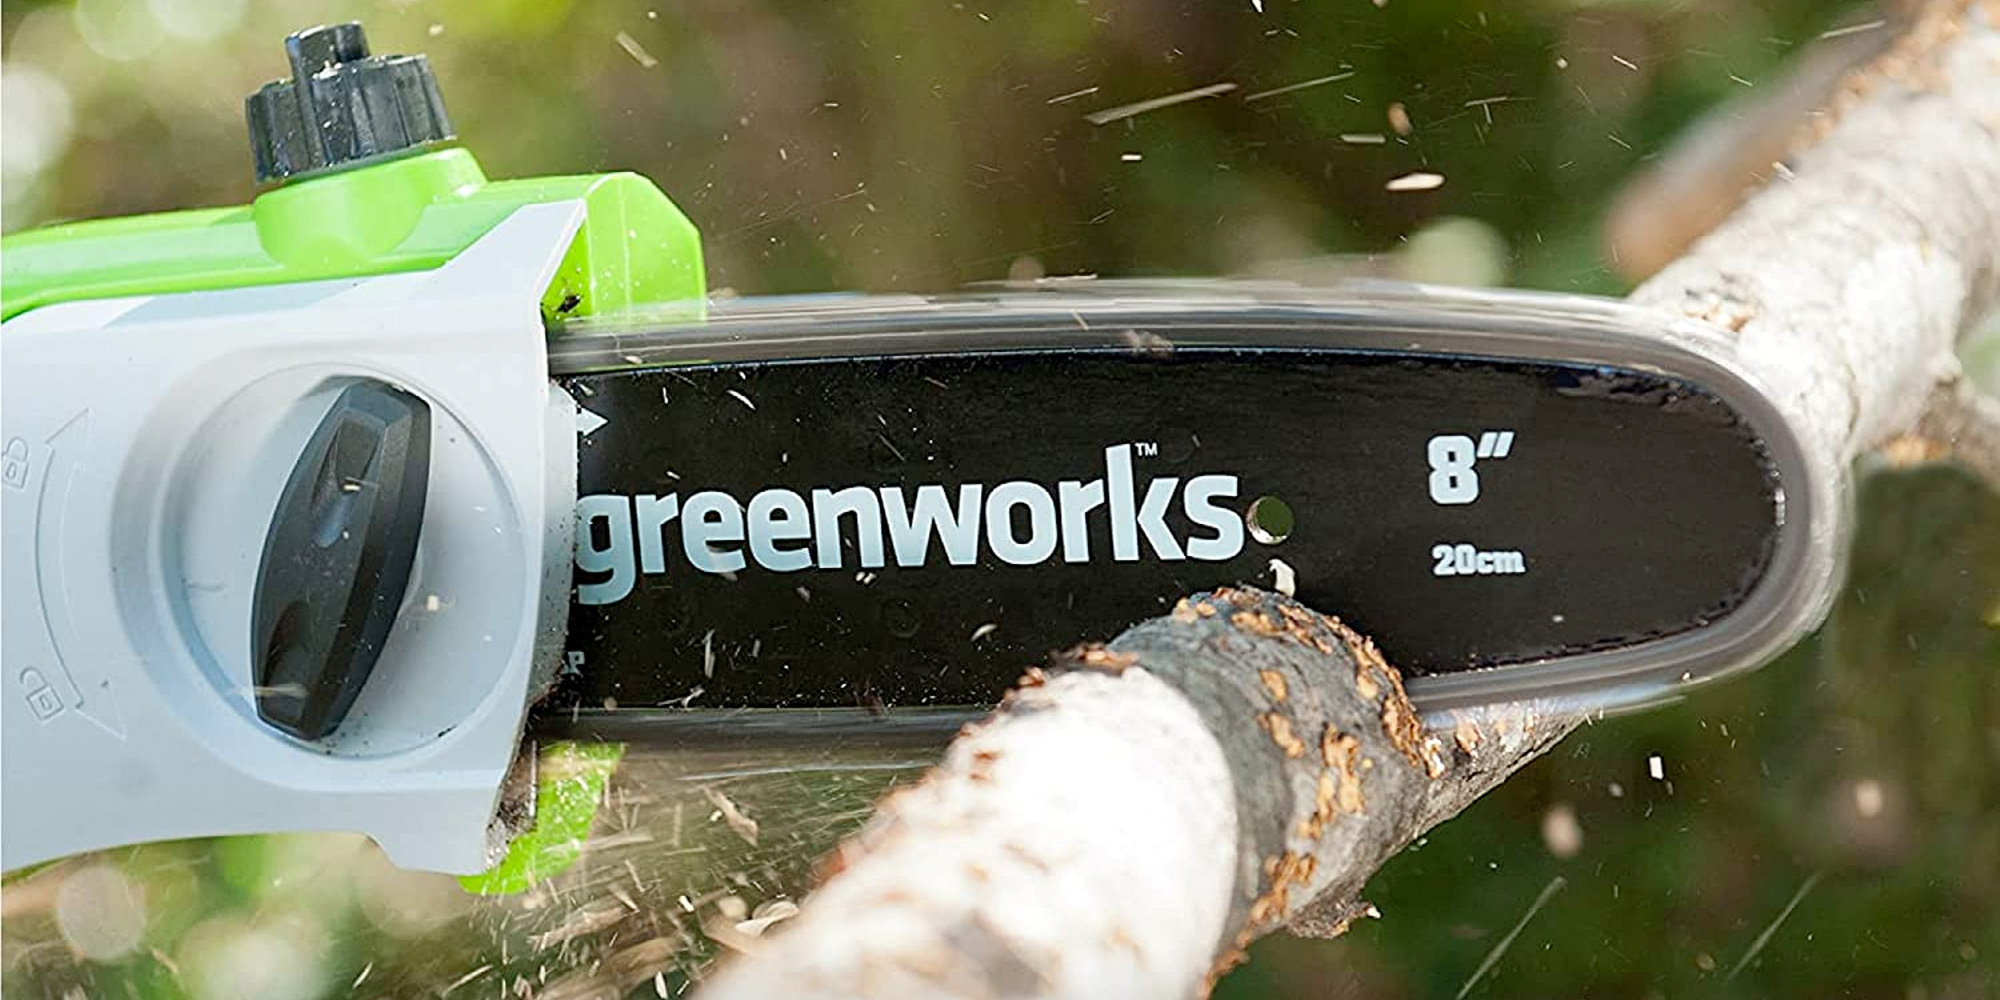 https://9to5toys.com/wp-content/uploads/sites/5/2022/04/greenworks-8-inch-pole-saw.jpg